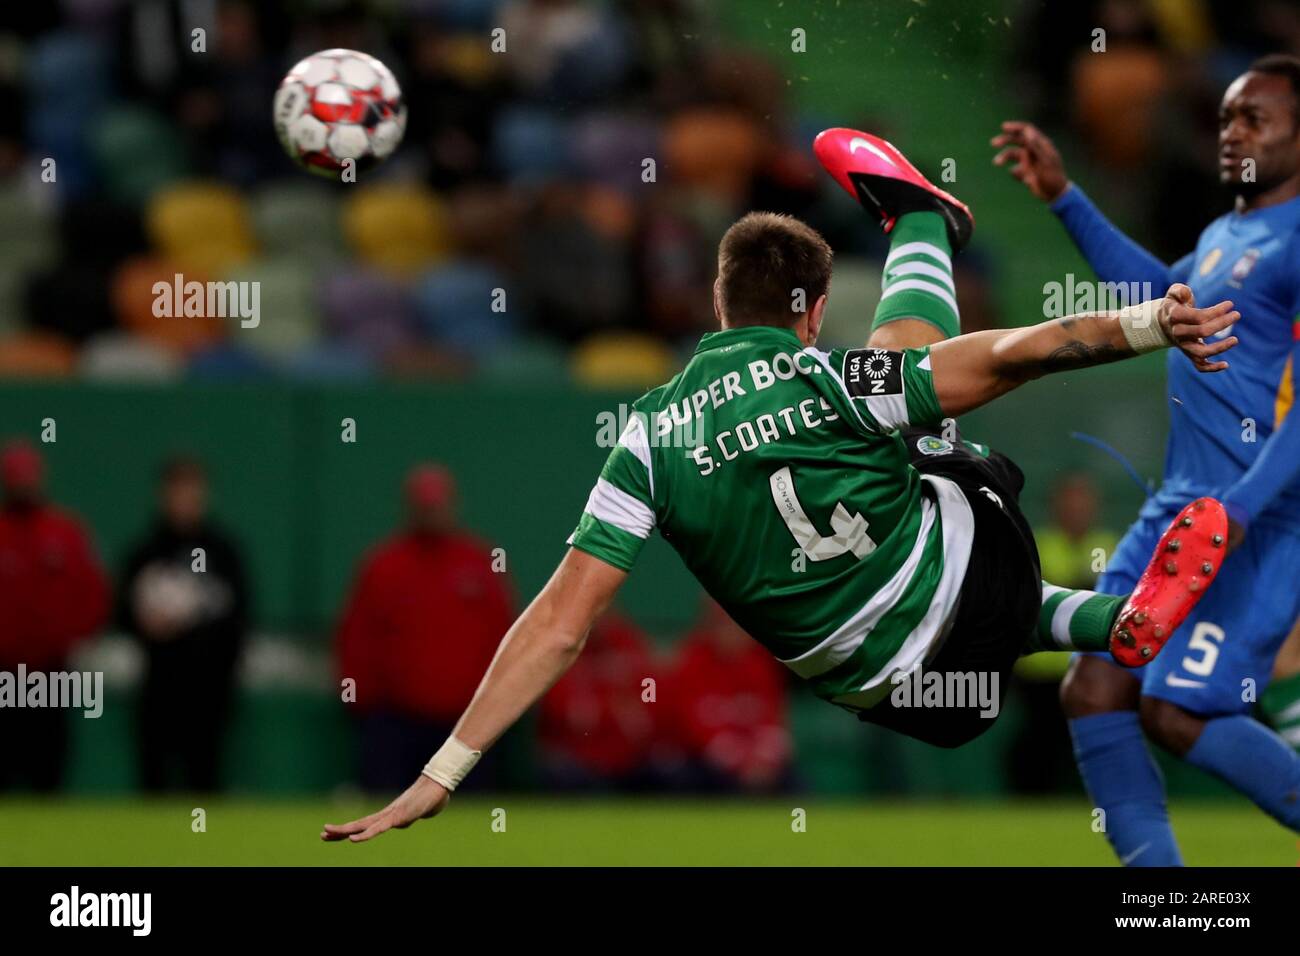 Lisbon. 27th Jan, 2020. Sebastian Coates of Sporting CP competes during the Portuguese League football match between Sporting CP and CS Maritimo at Jose Alvalade stadium in Lisbon, Portugal on Jan. 27, 2020. Credit: Pedro Fiuza/Xinhua/Alamy Live News Stock Photo